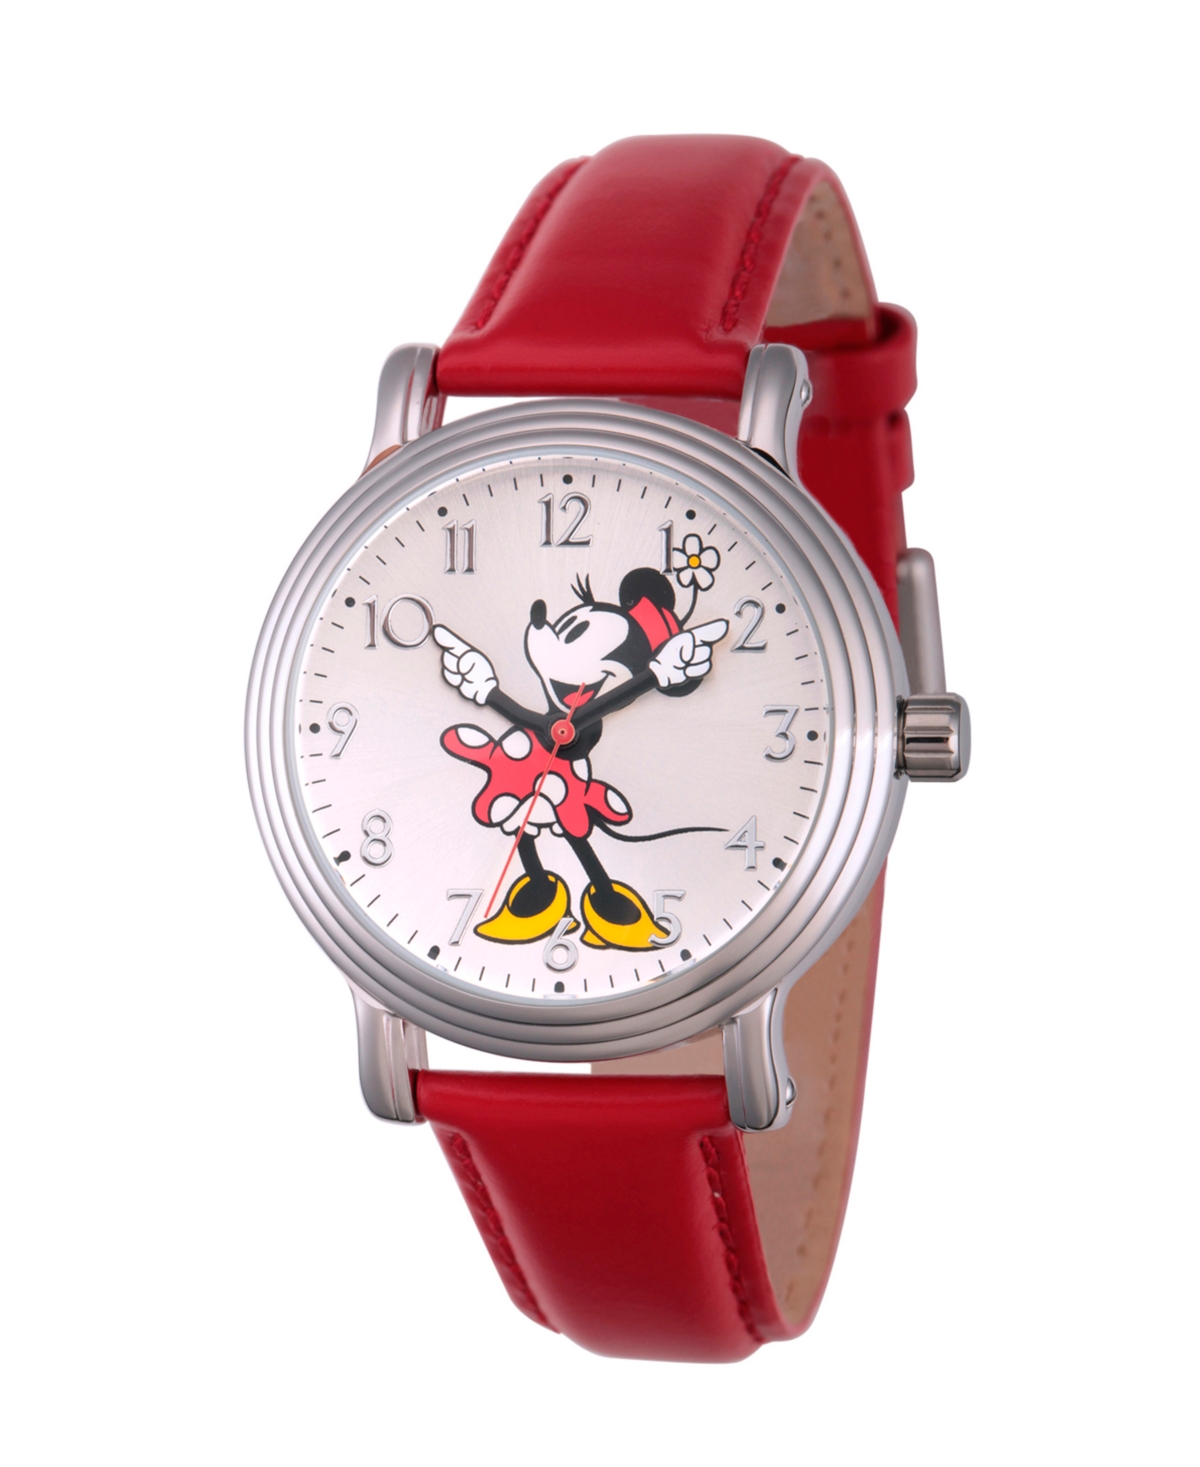 Disney Minnie Mouse Women's Silver Vintage Alloy Watch - Red